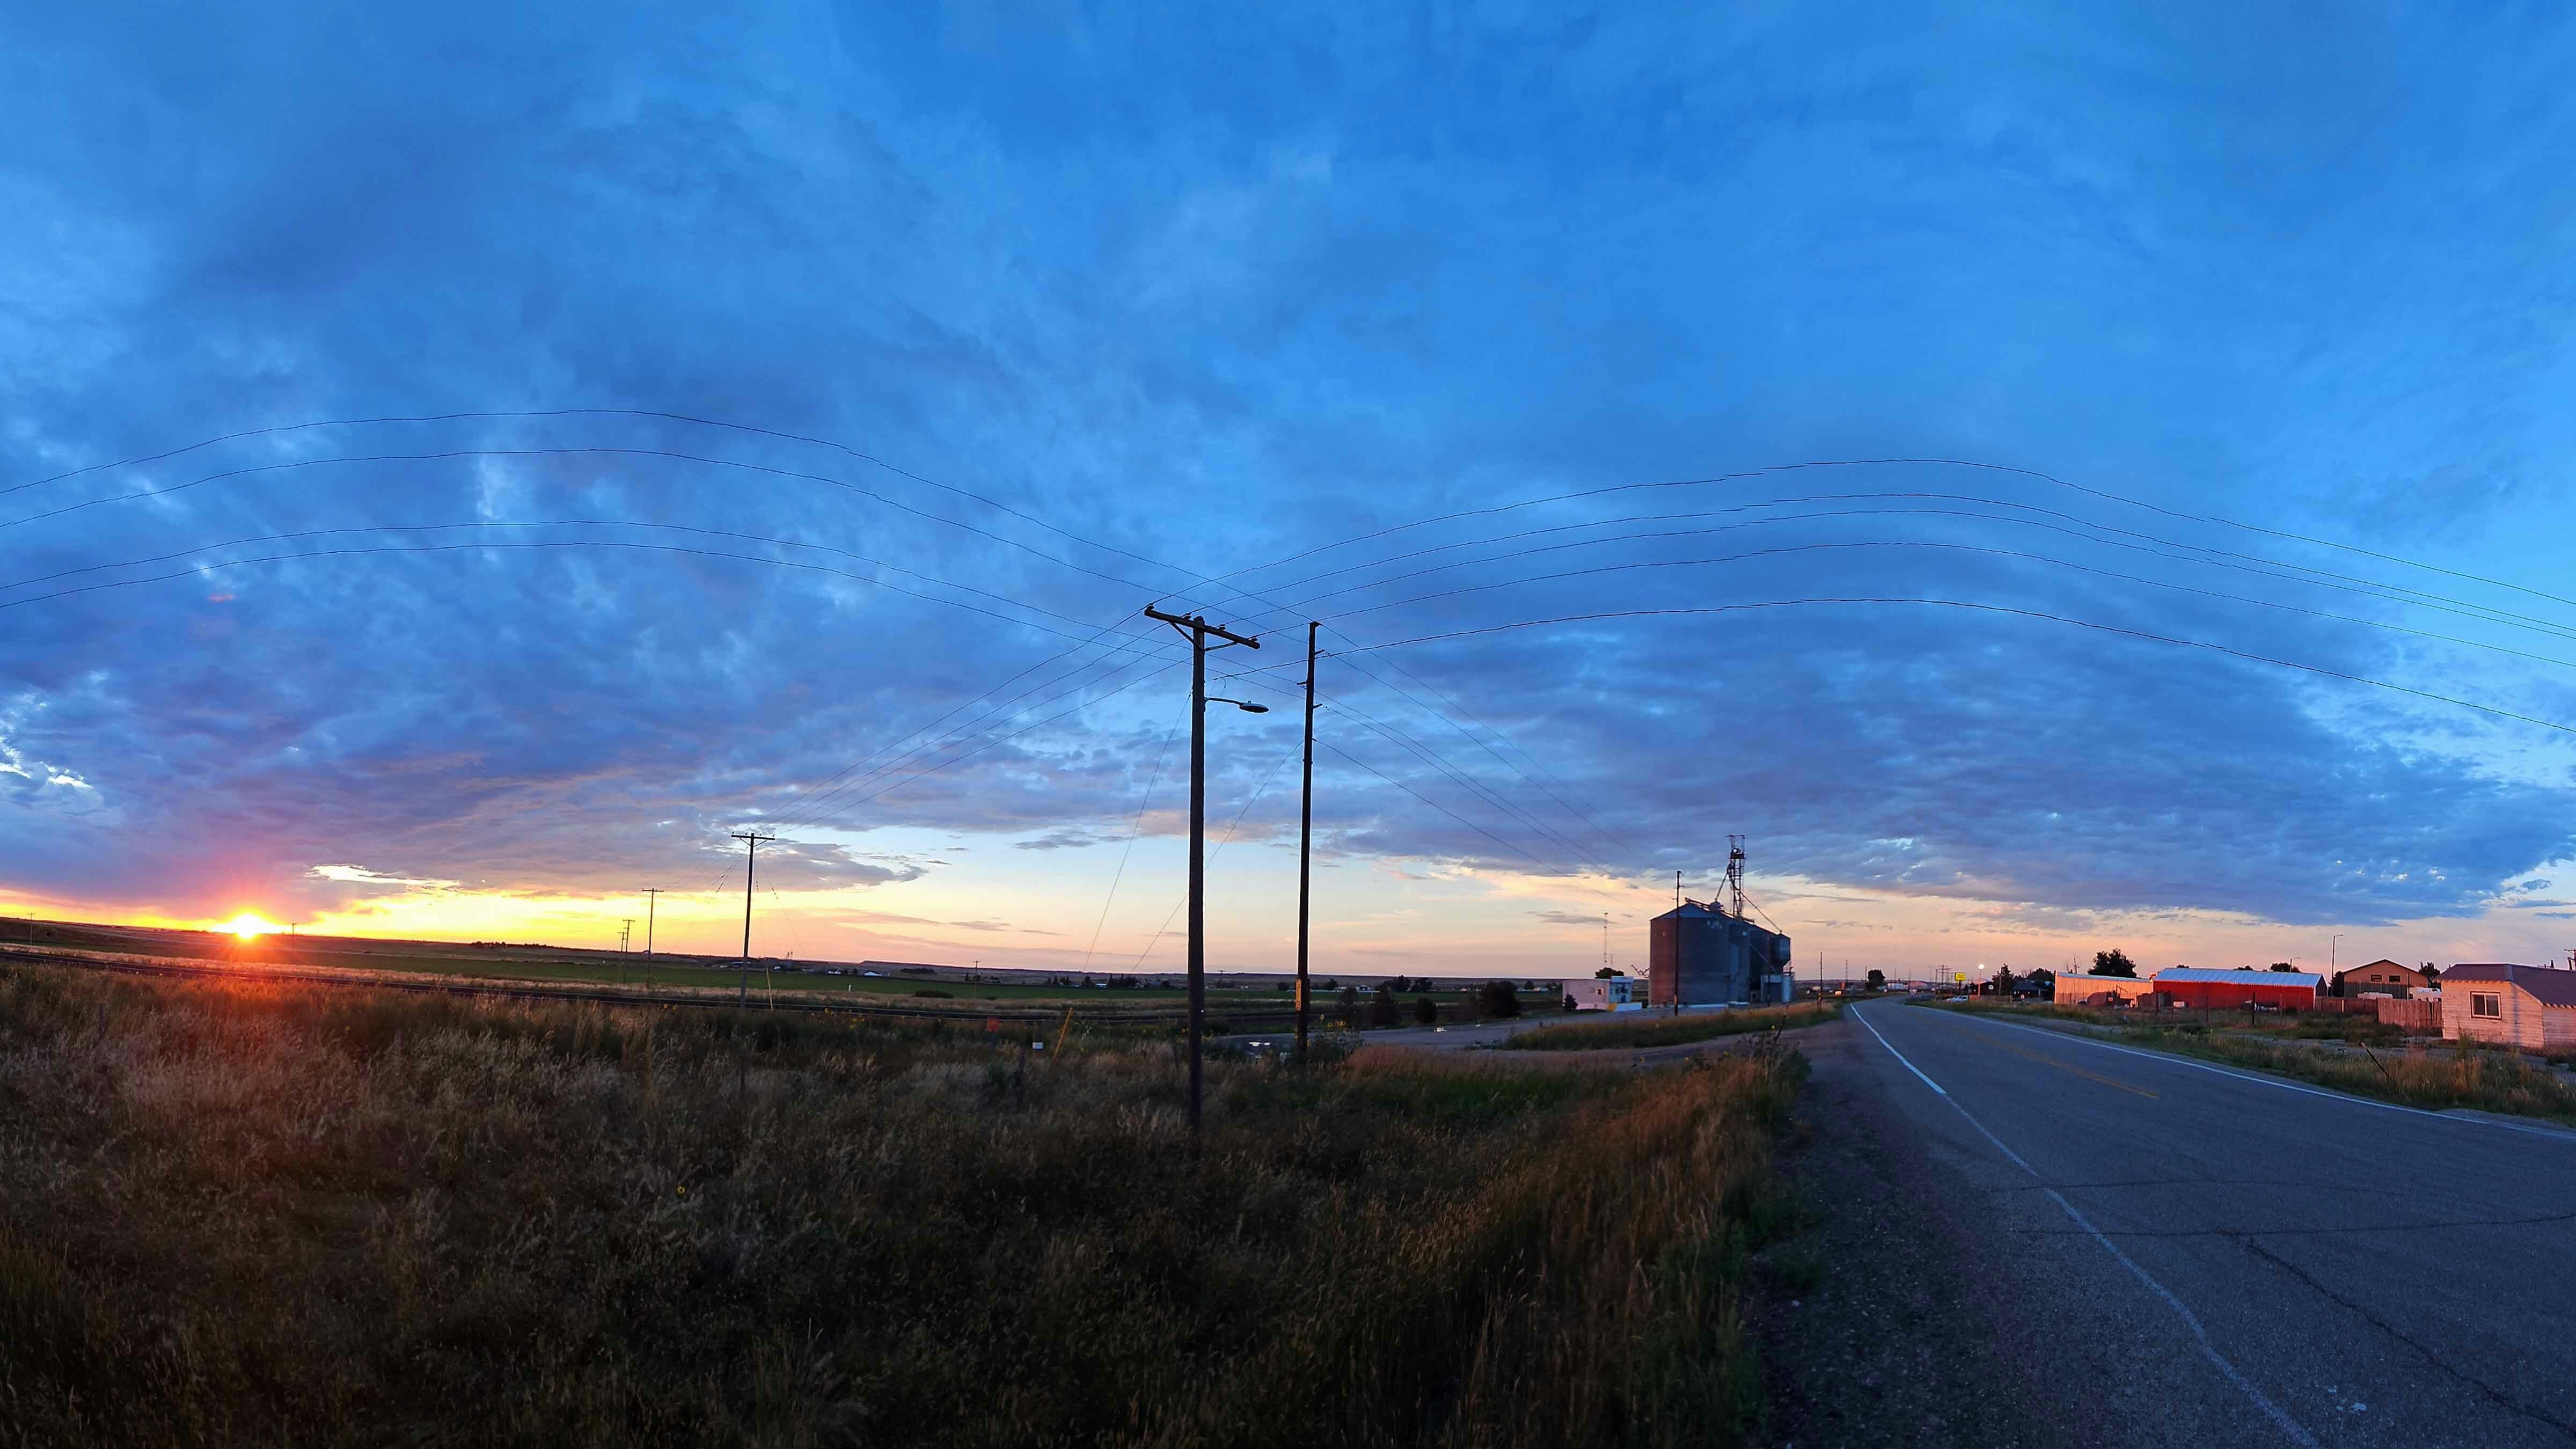 "Beautiful evening in Pine Bluffs, Wyoming" on August 4, 2023